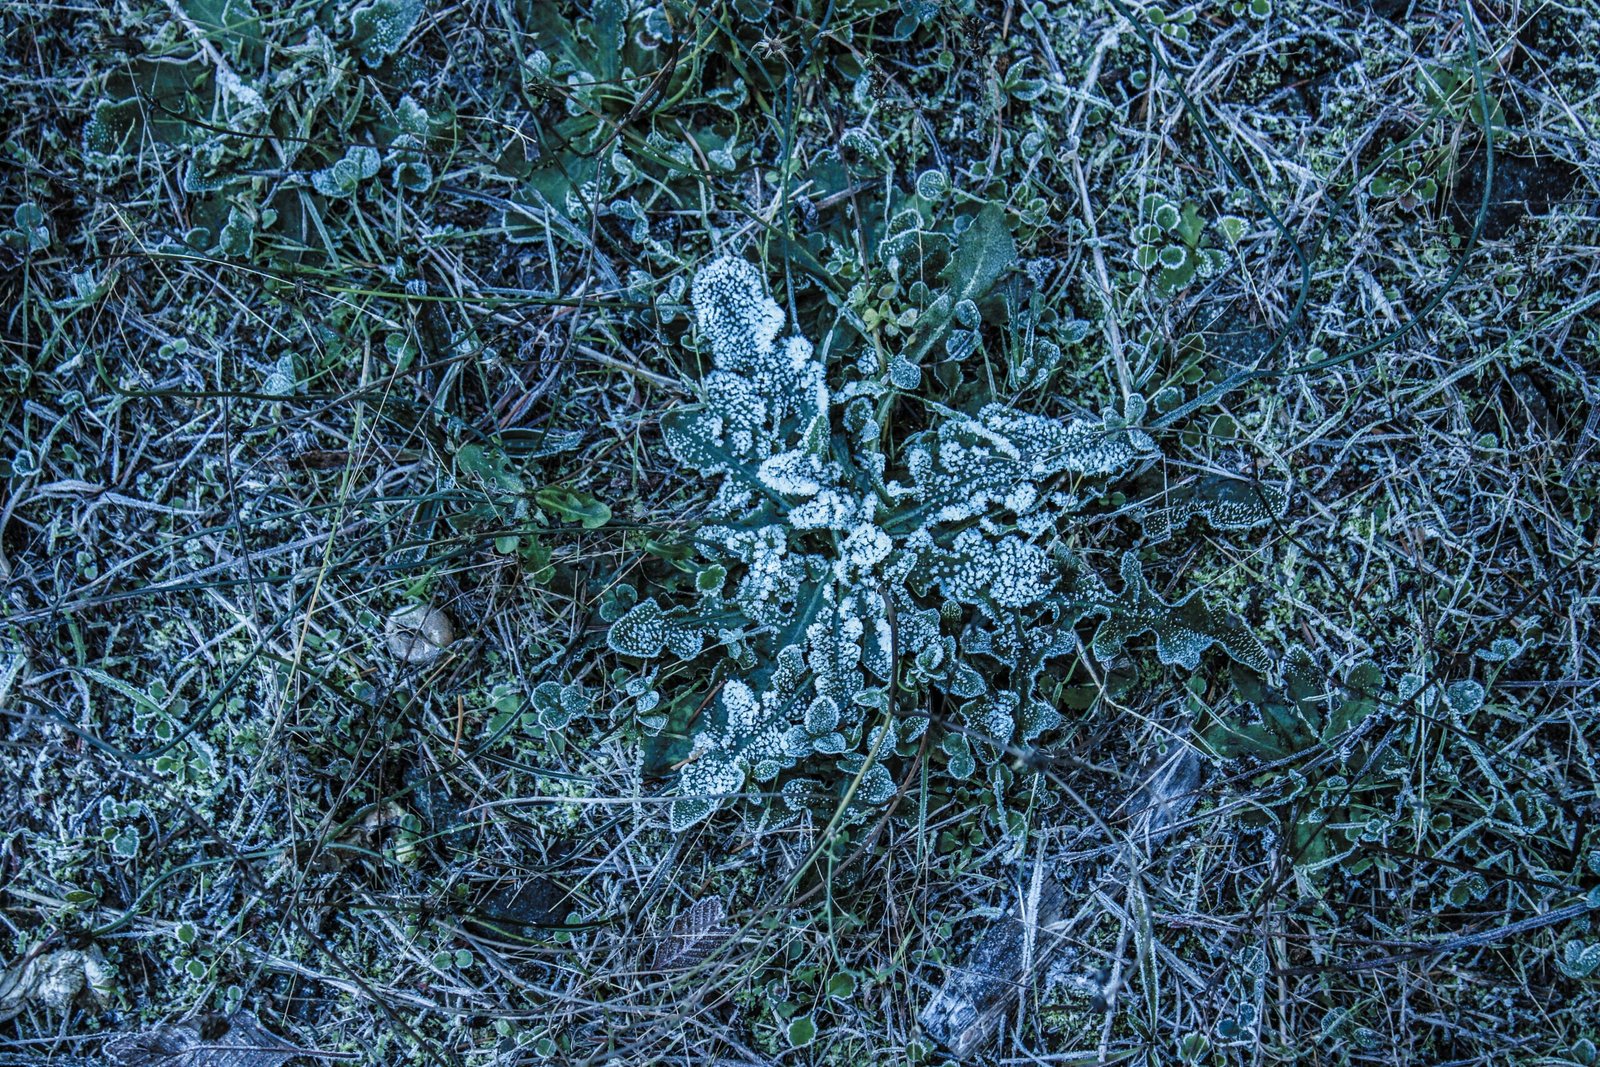 a snowflake is seen on the ground in the grass